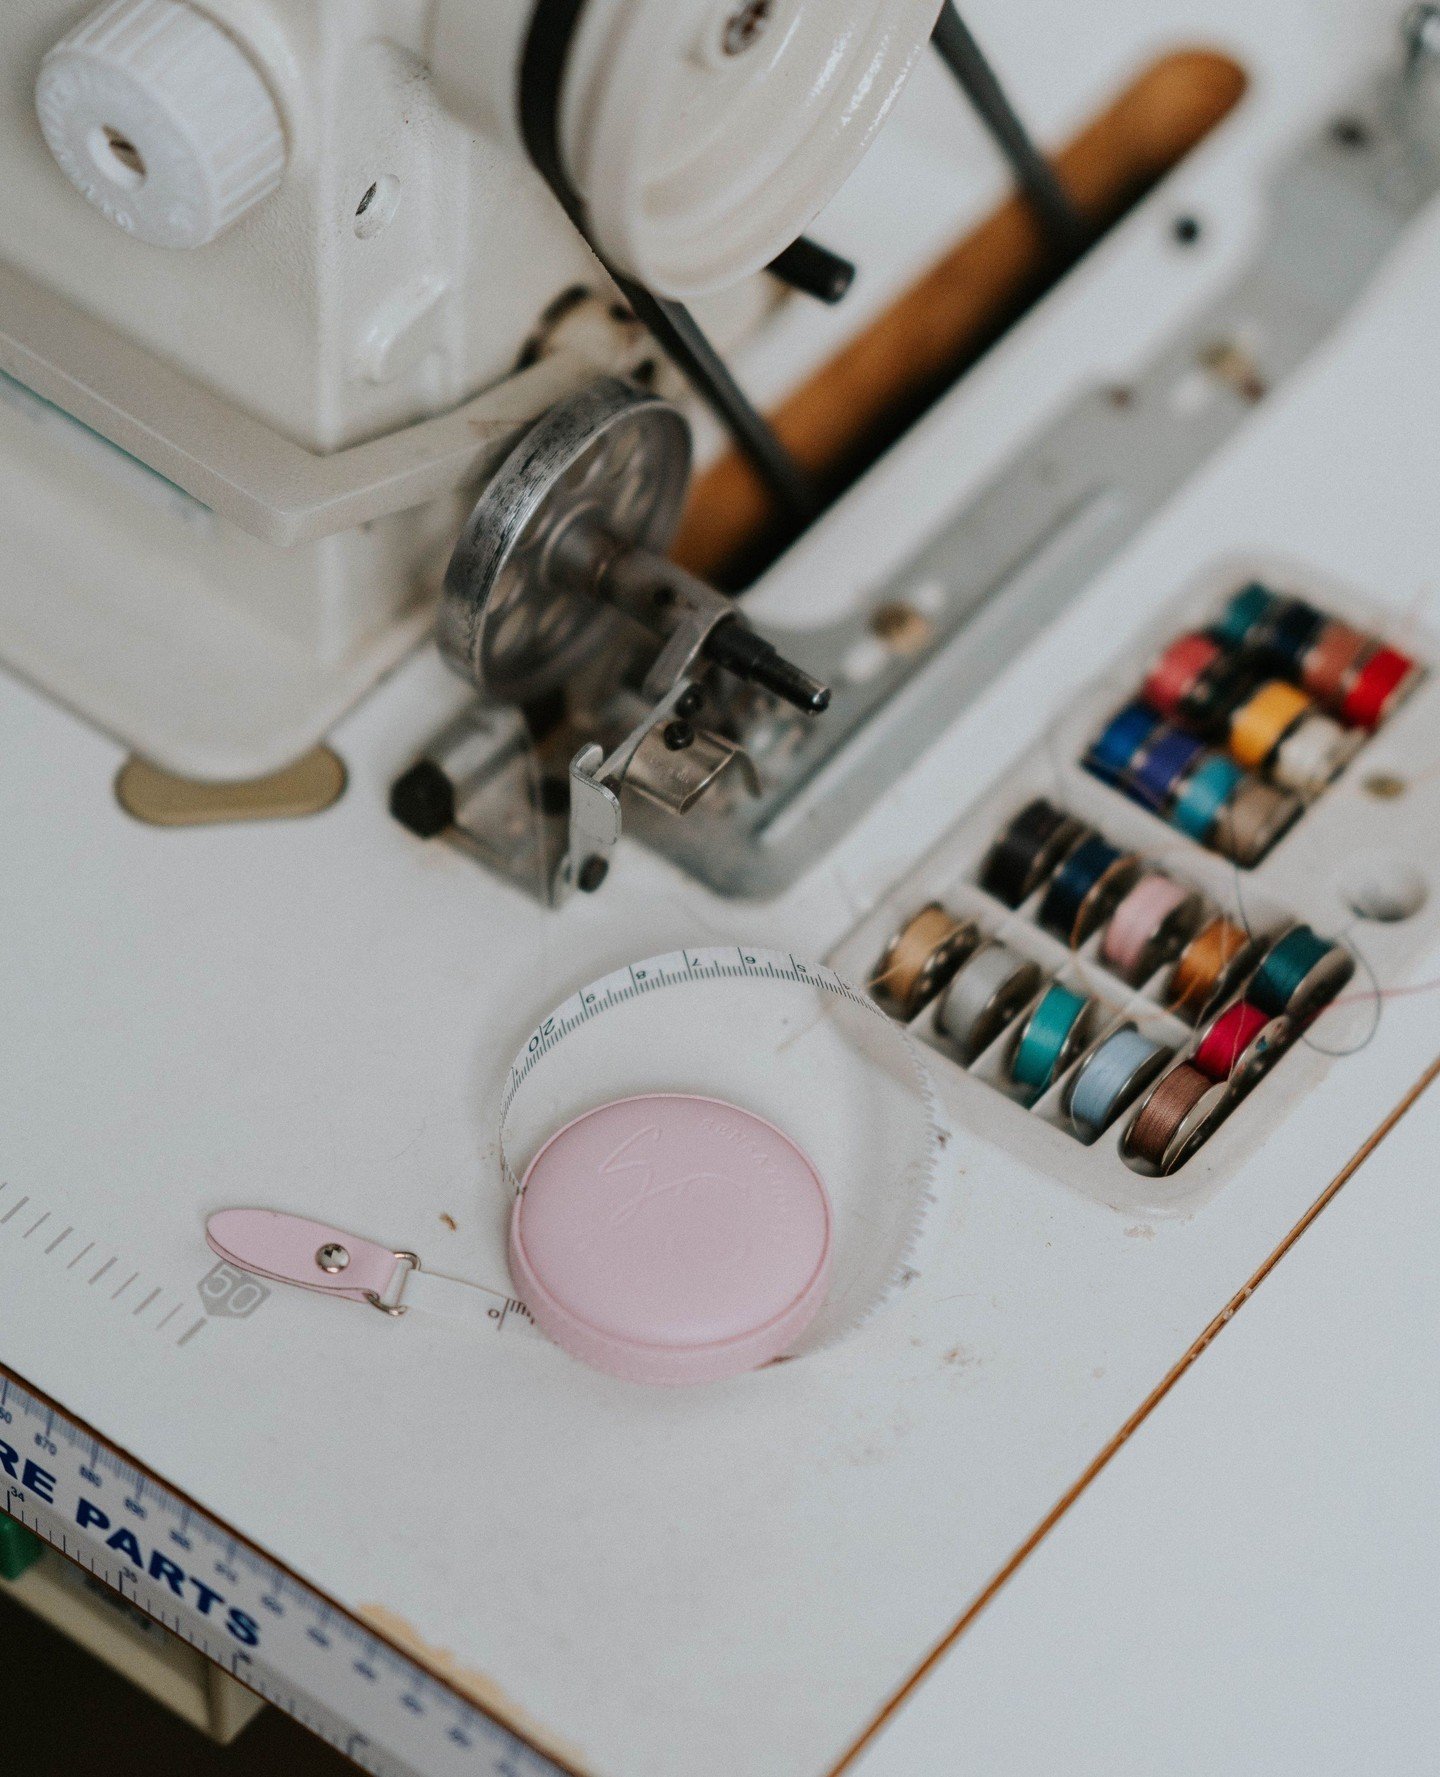 Just a reminder, no sewing classes this week but we look forward to see you sewing your hearts out in the studio next week! 🧵🩷